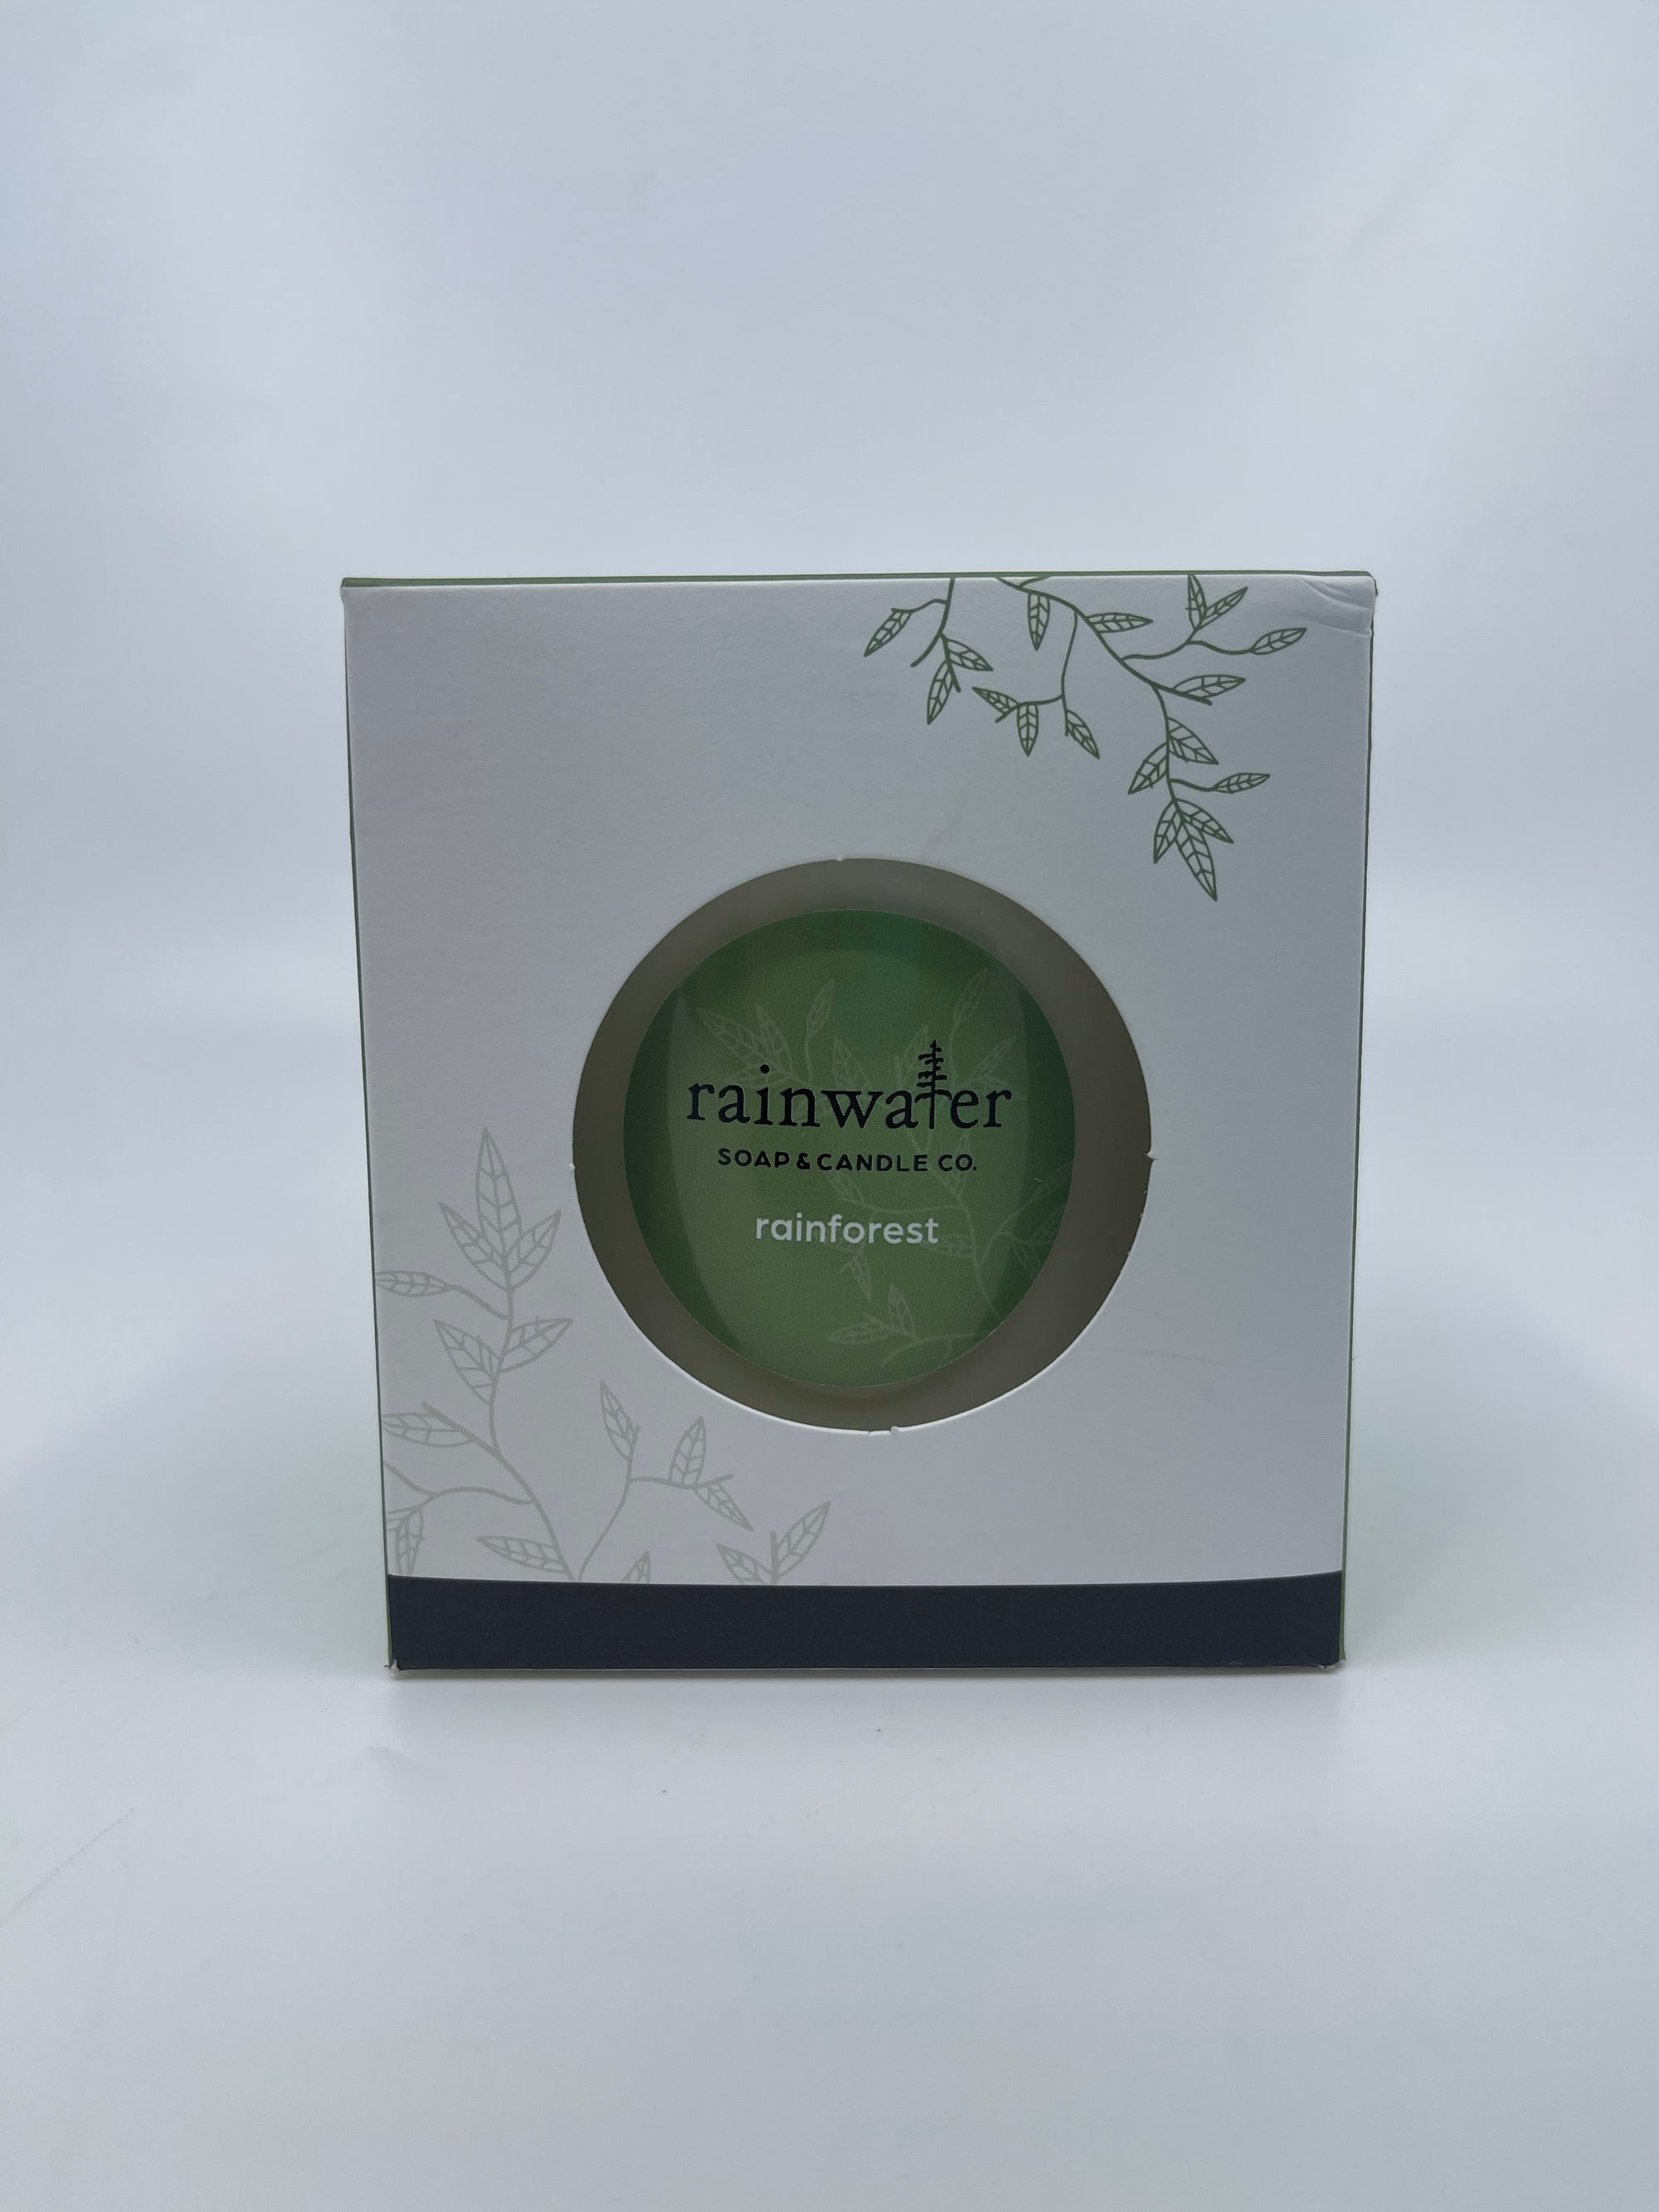 Rainwater Candles Rainforest - Rainwater Candles Rainforest -  - House of Himwitsa Native Art Gallery and Gifts